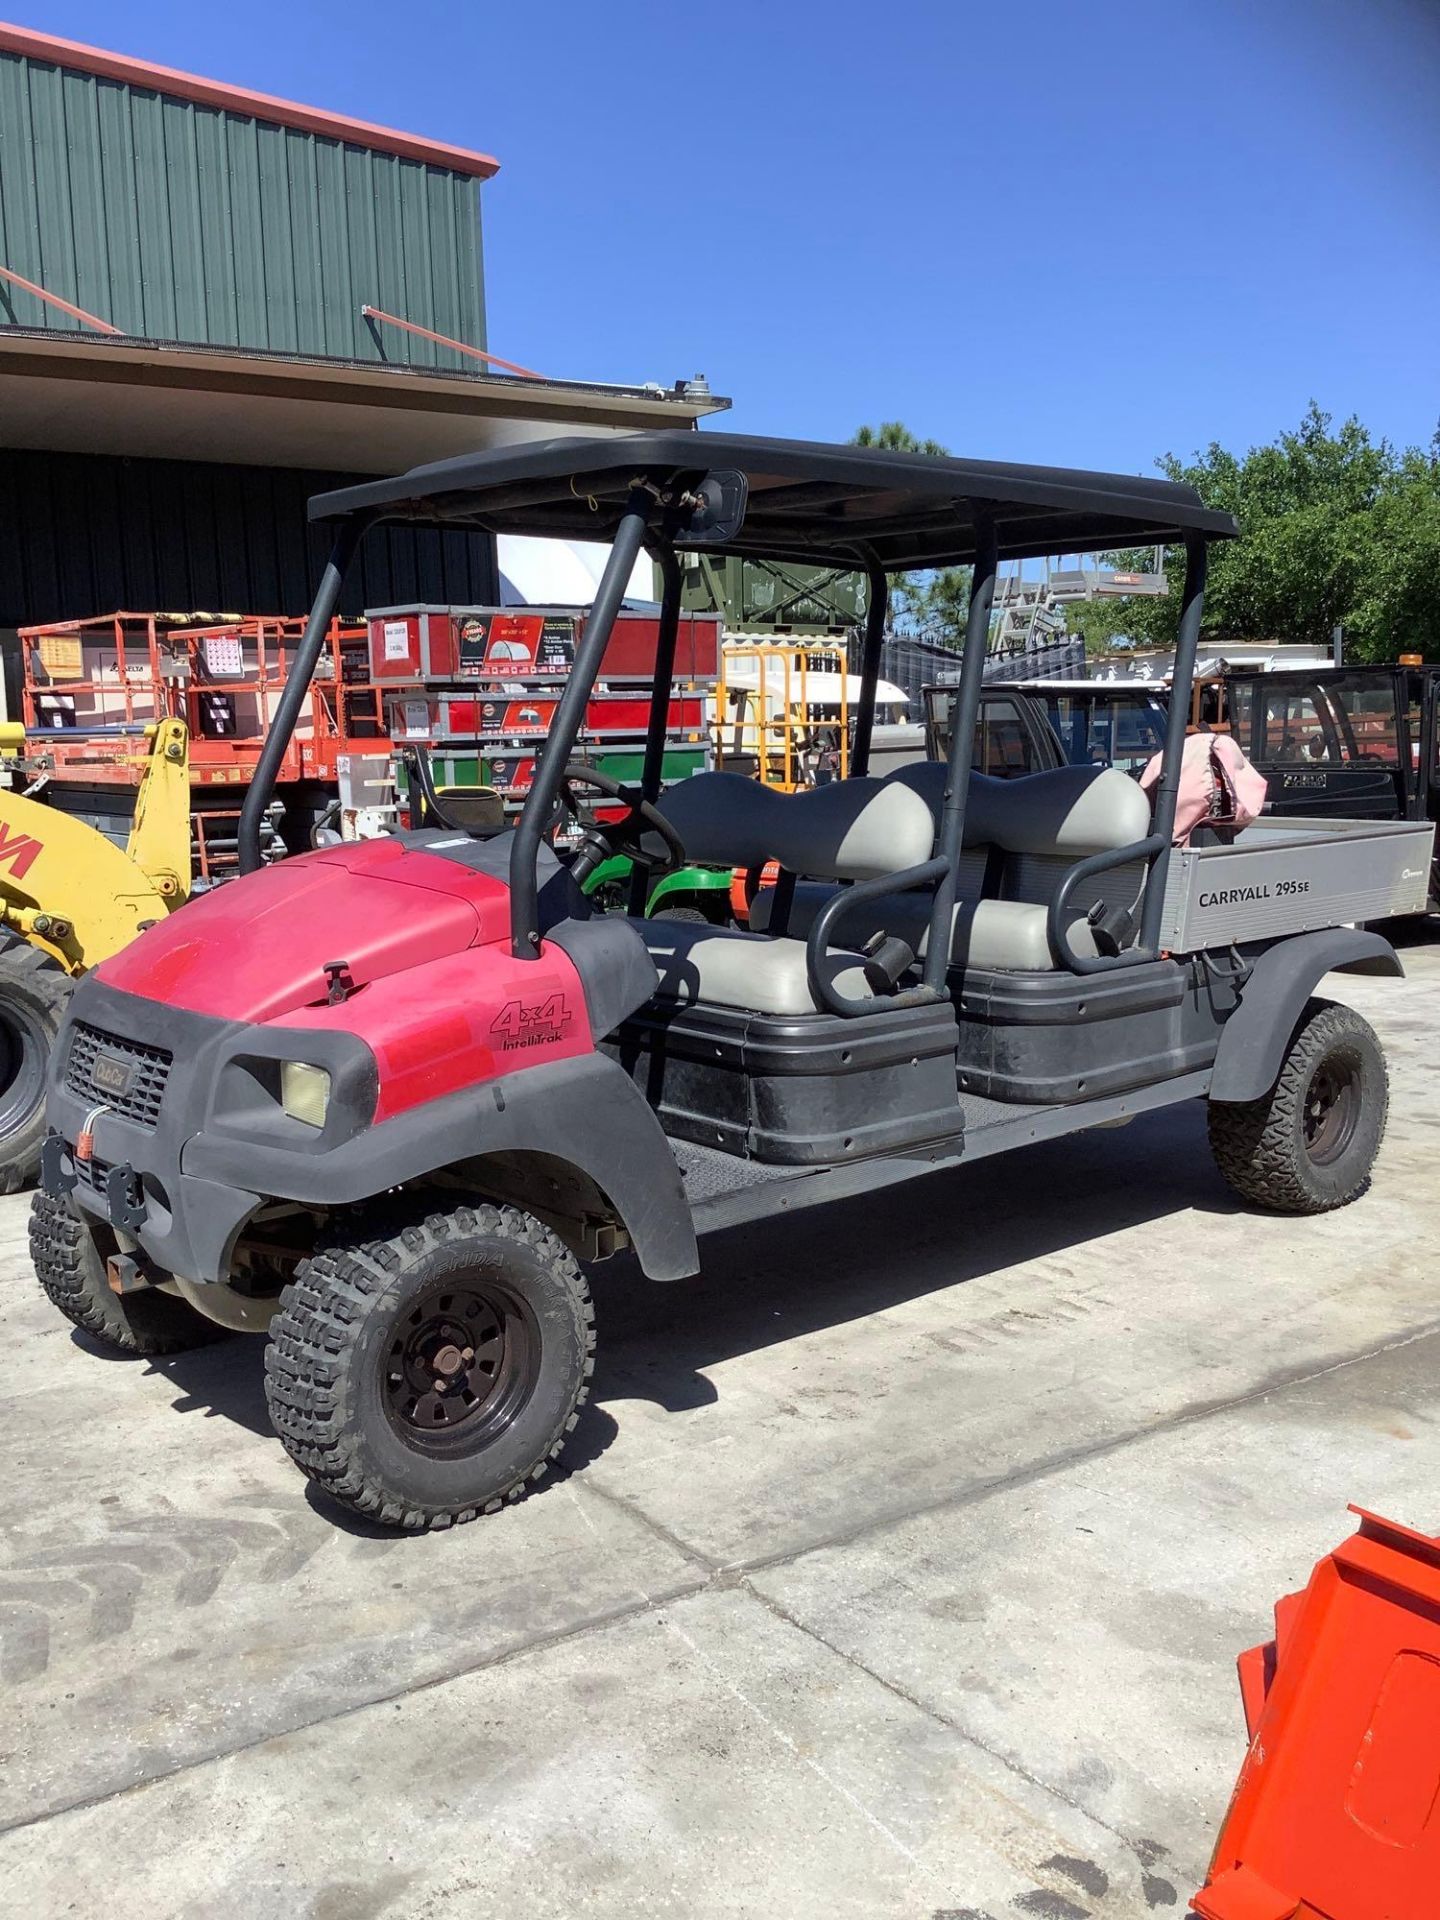 CLUB CAR CARYALL 295SE 4x4 INTELLITRAK GOLF CART, GAS POWERED , MANUAL DUMP BED, HITCH IN FRONT & BA - Image 12 of 19